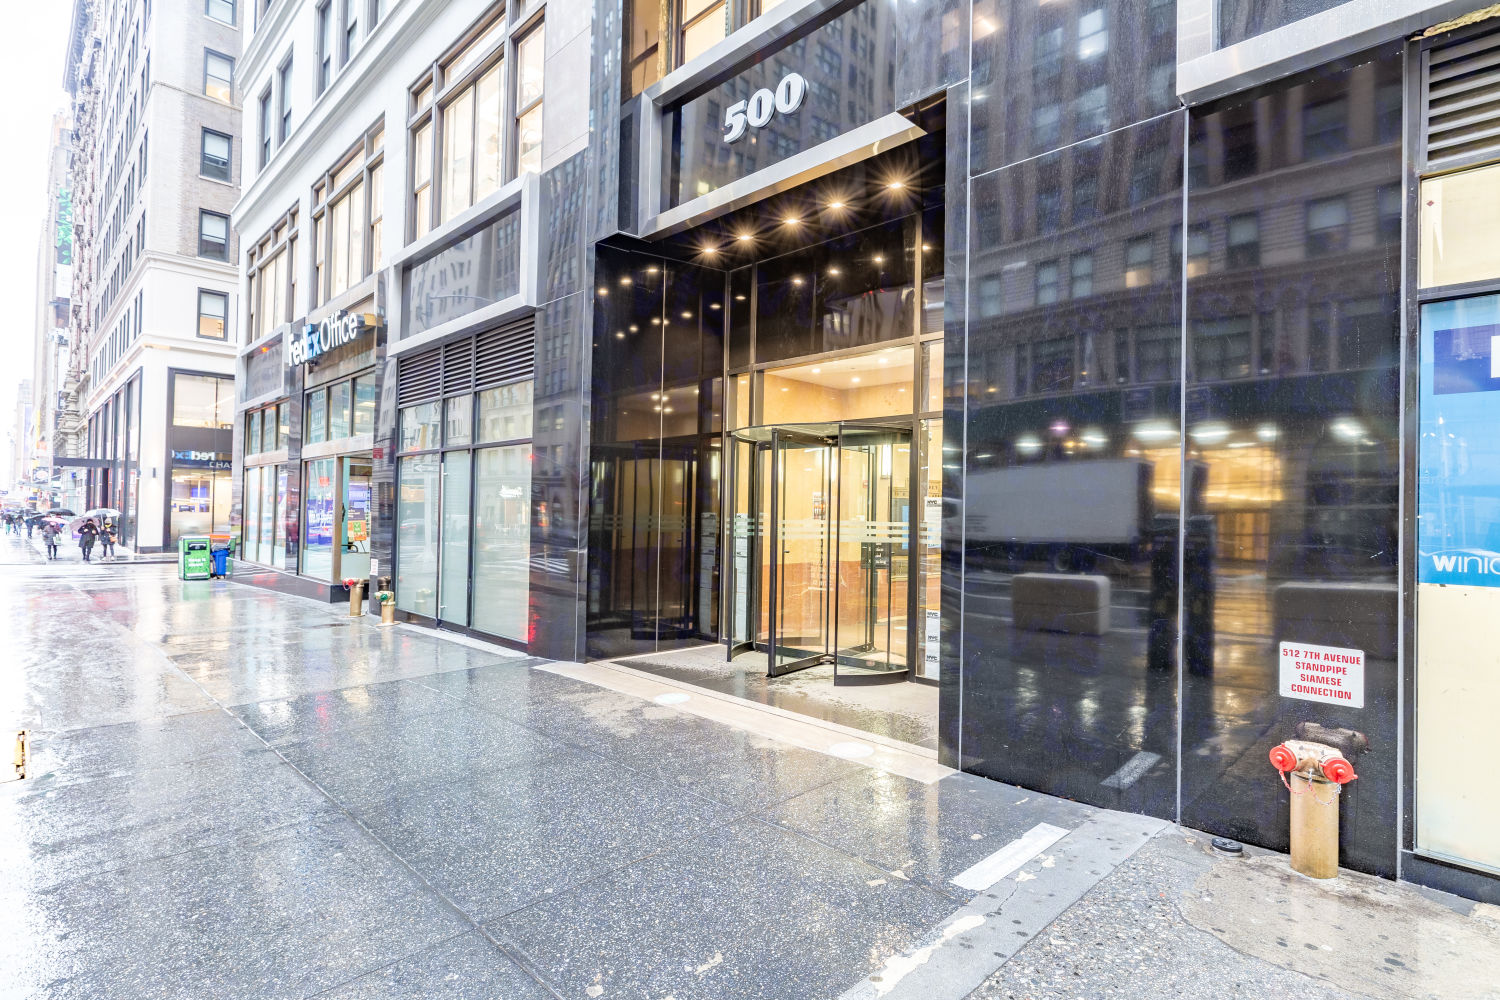 500 Seventh Avenue, New York, NY Commercial Space for Rent